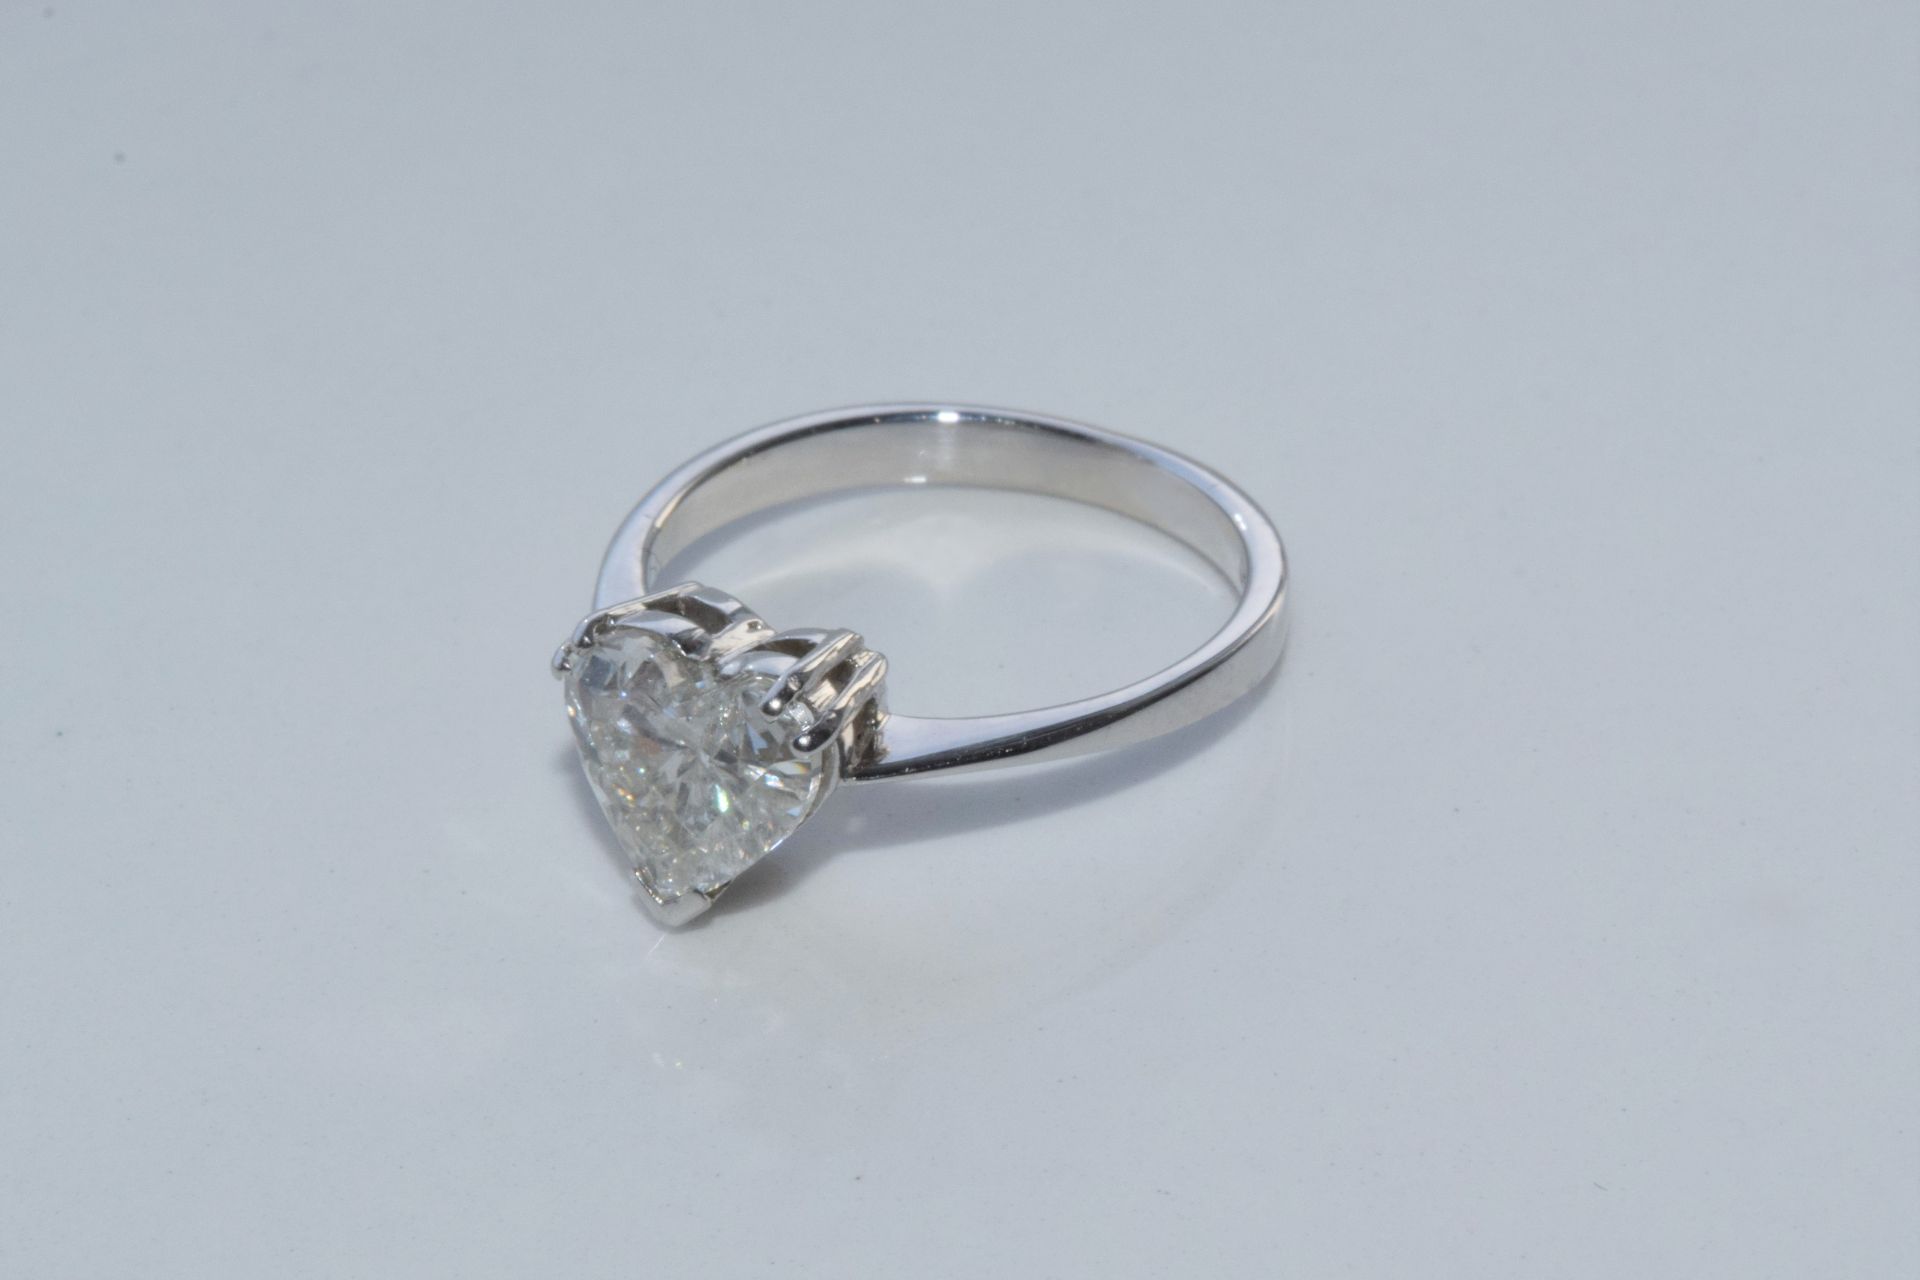 2.16ct Heart cut diamond ring mounted on 18ct white gold band - Image 3 of 5